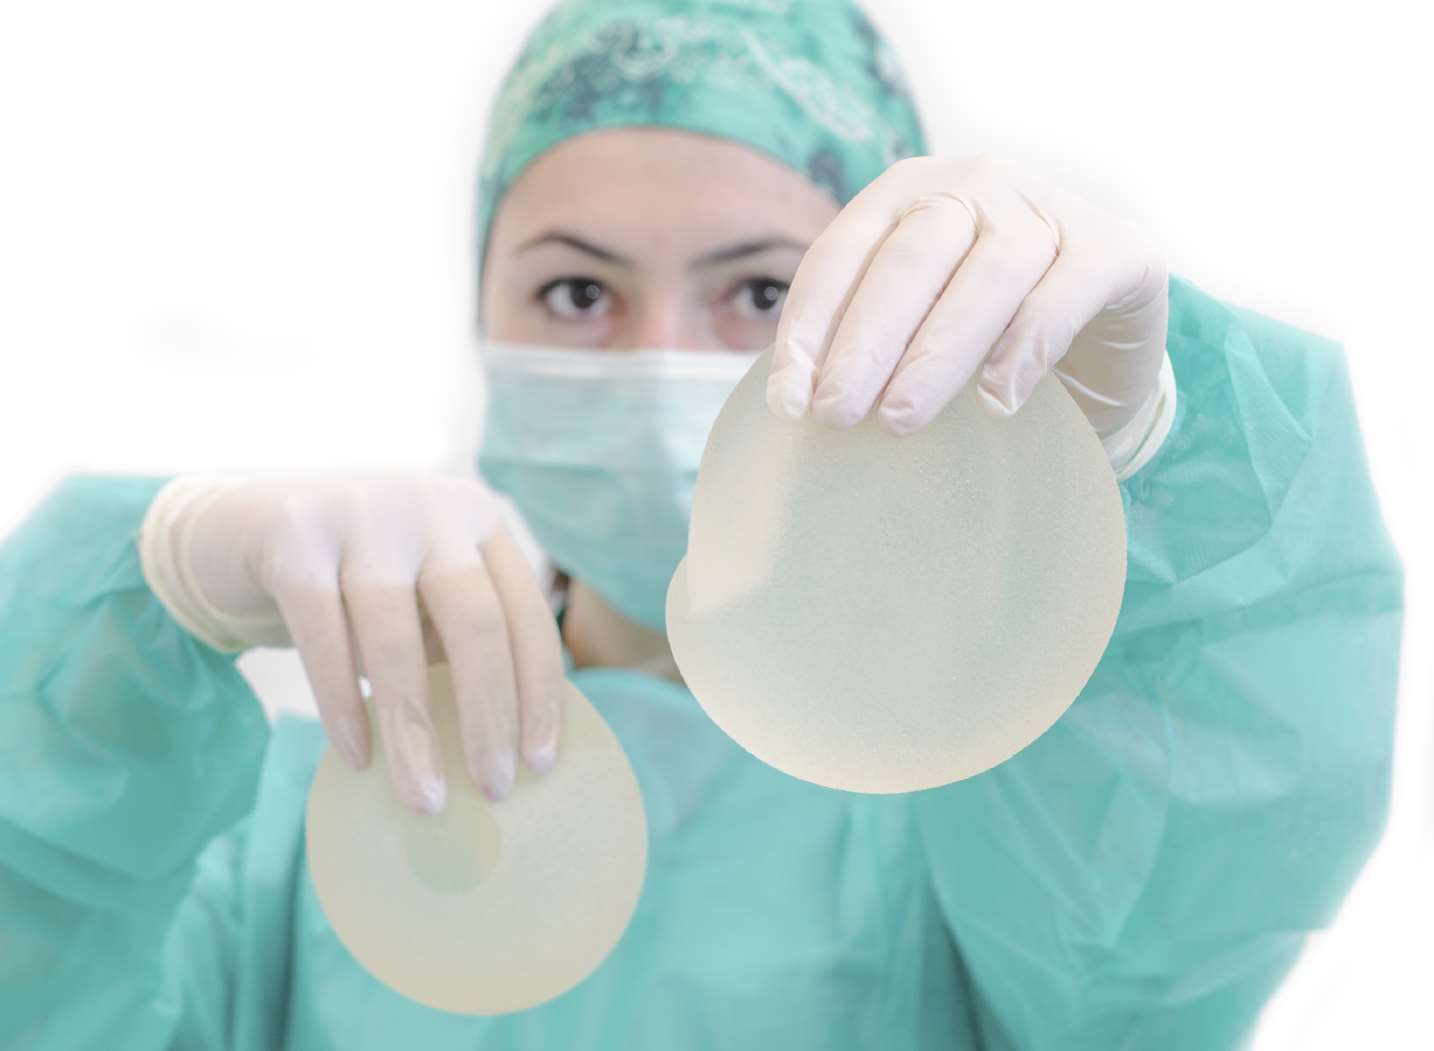 Implants used in breast augmentation surgery. Stock image